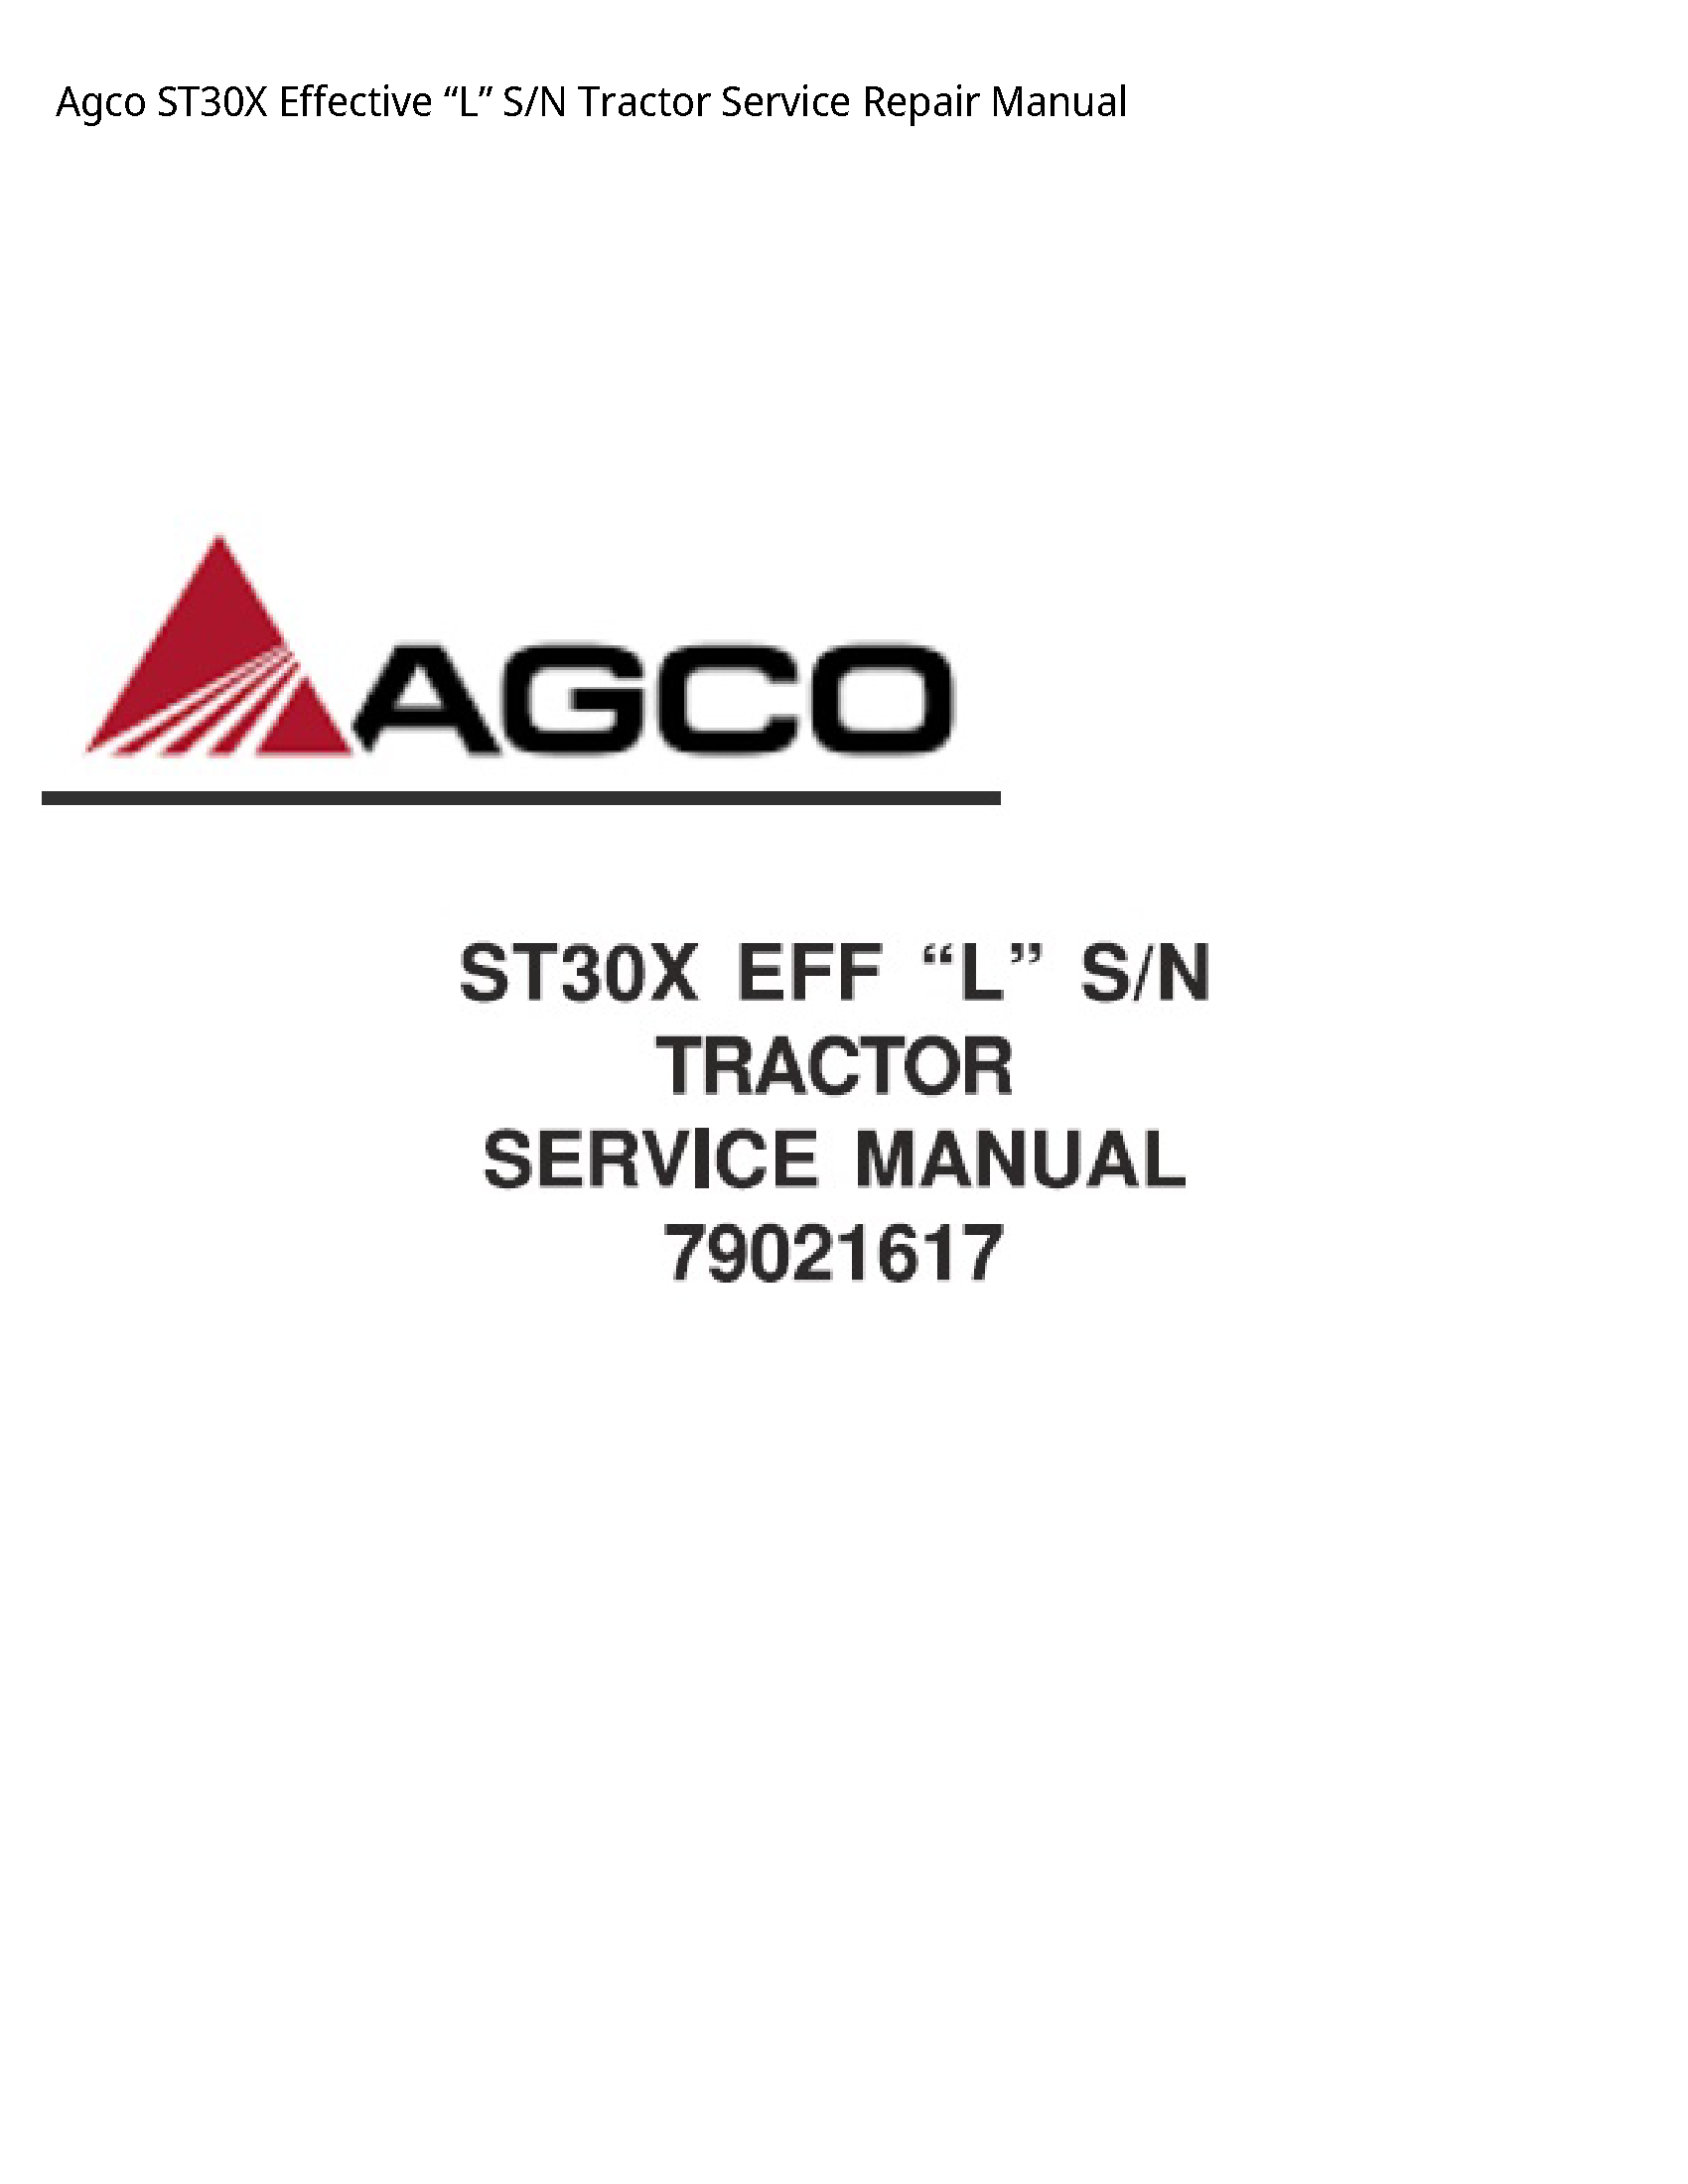 AGCO ST30X Effective “L” S/N Tractor manual